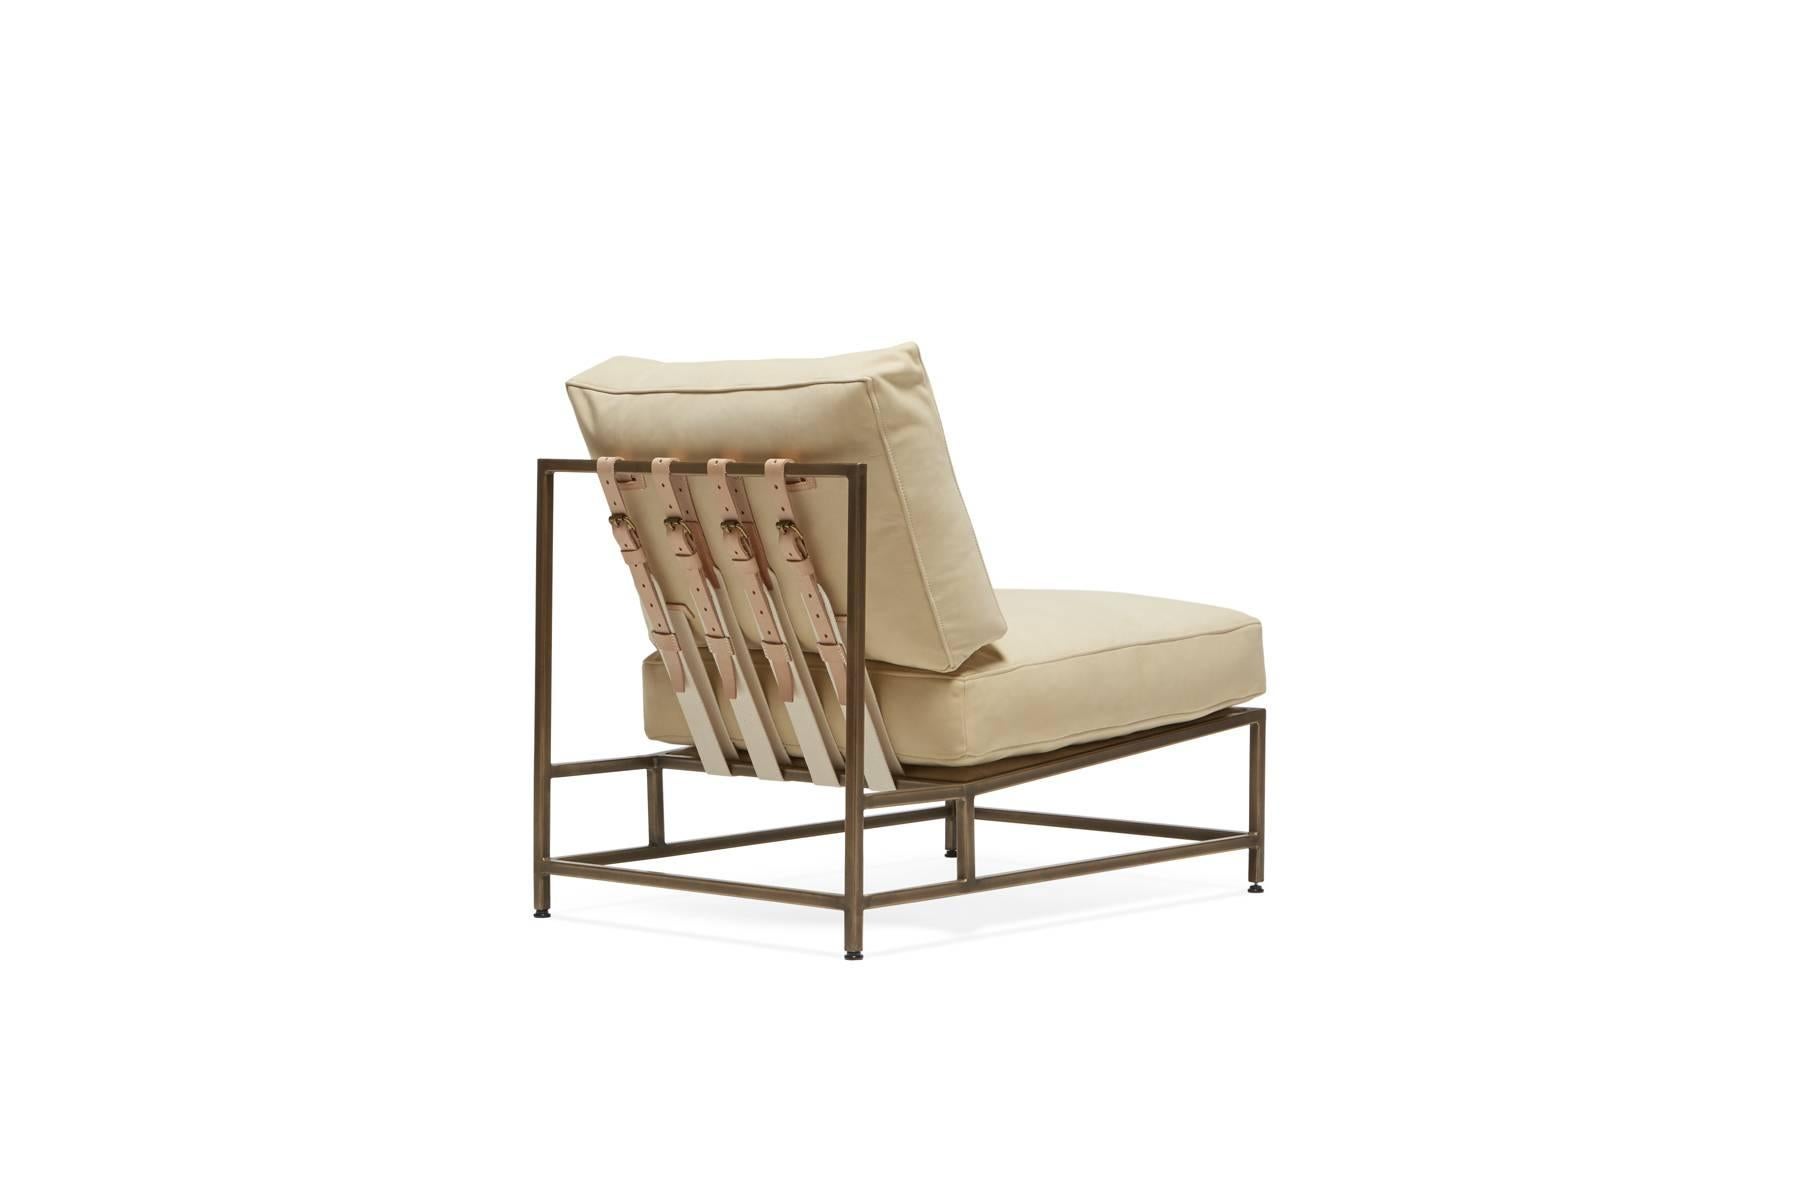 Sleek and refined, the Inheritance Chair is a great addition to nearly any space. 

This variation is upholstered in a warm cream nubuck leather with a soft suede like touch. The foam seat cushions have been wrapped in down, allowing for a soft and